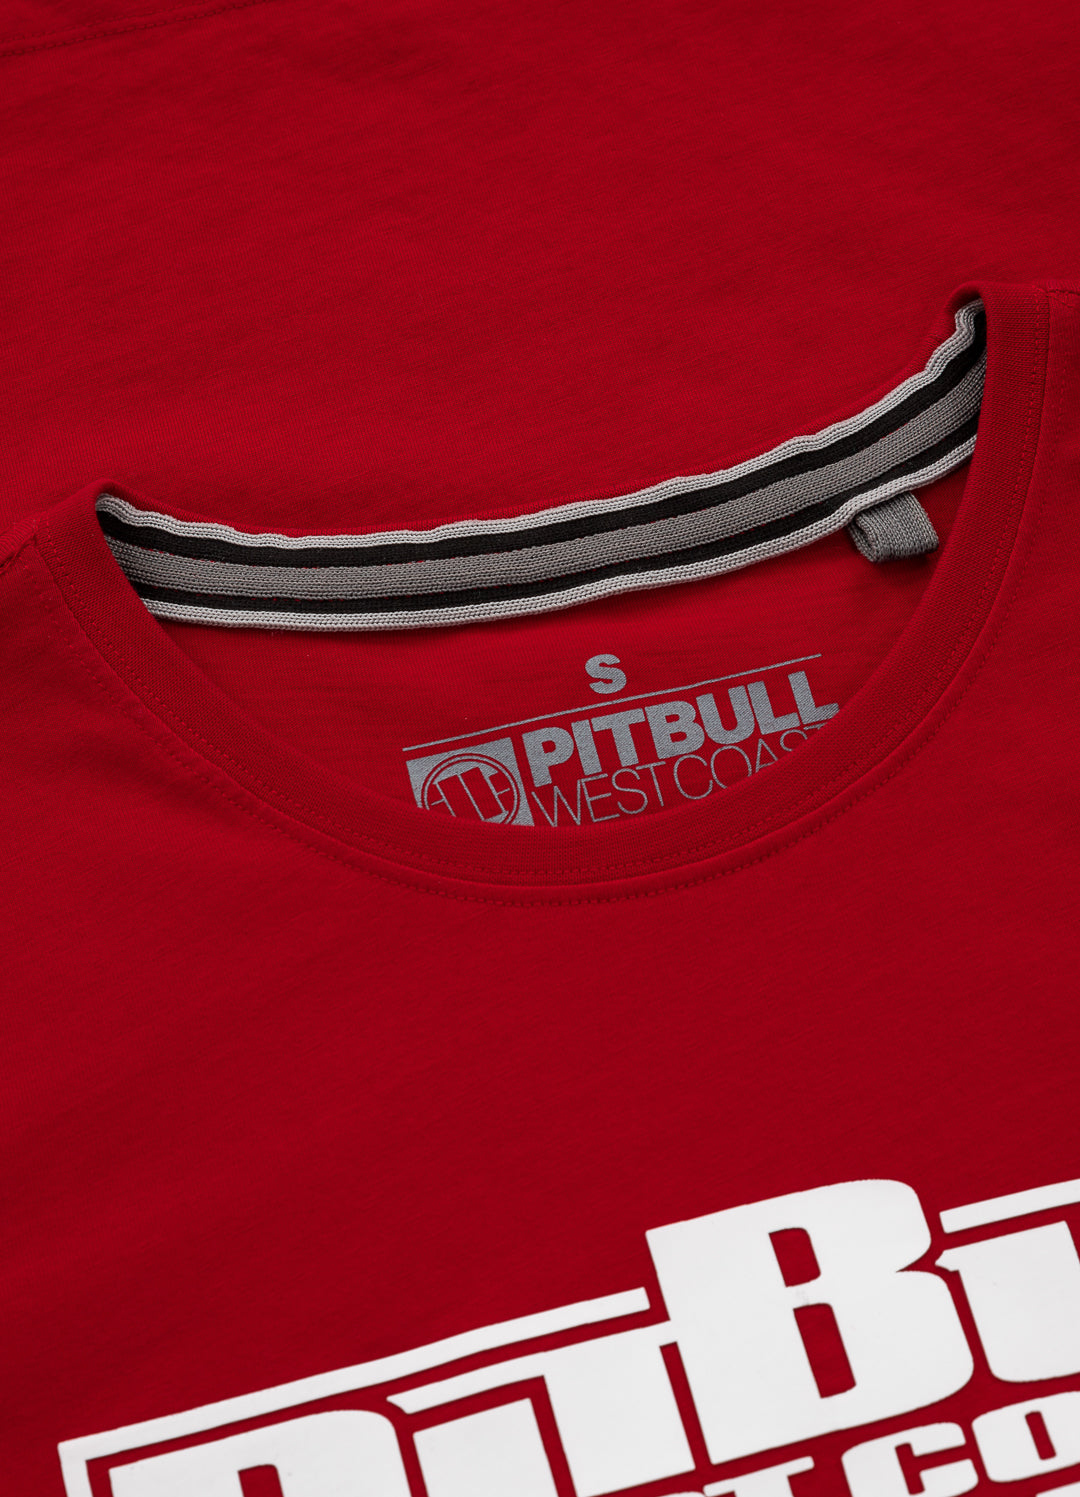 BOXING Red T-shirt.